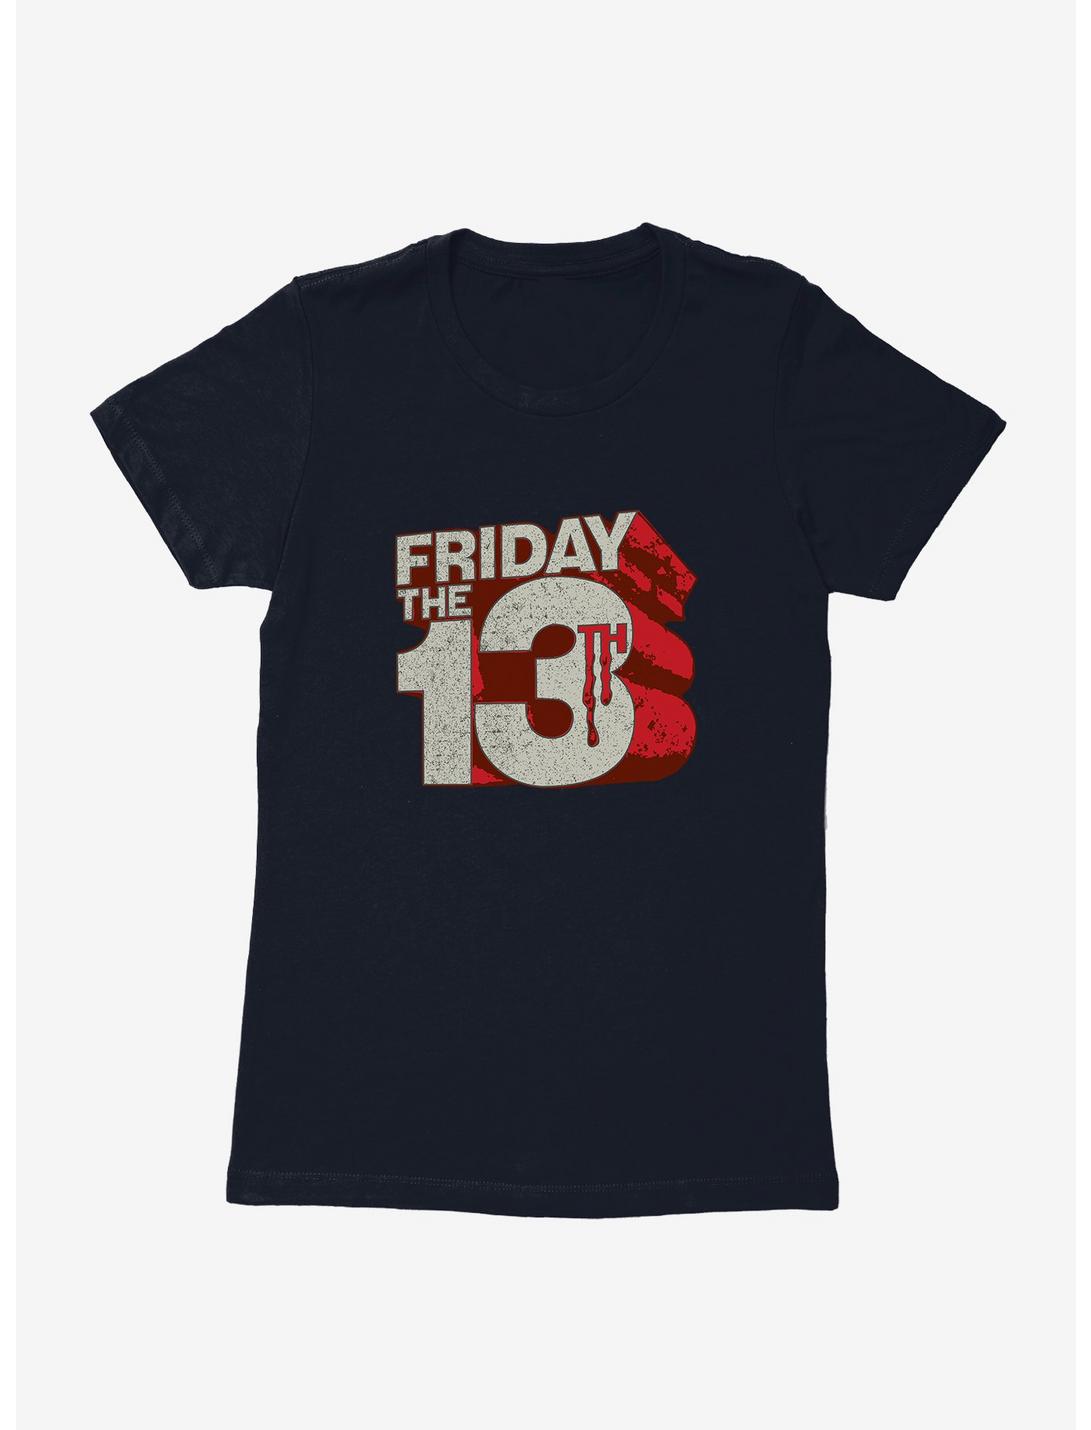 Friday The 13th Friday The 13th Womens T-Shirt, MIDNIGHT NAVY, hi-res